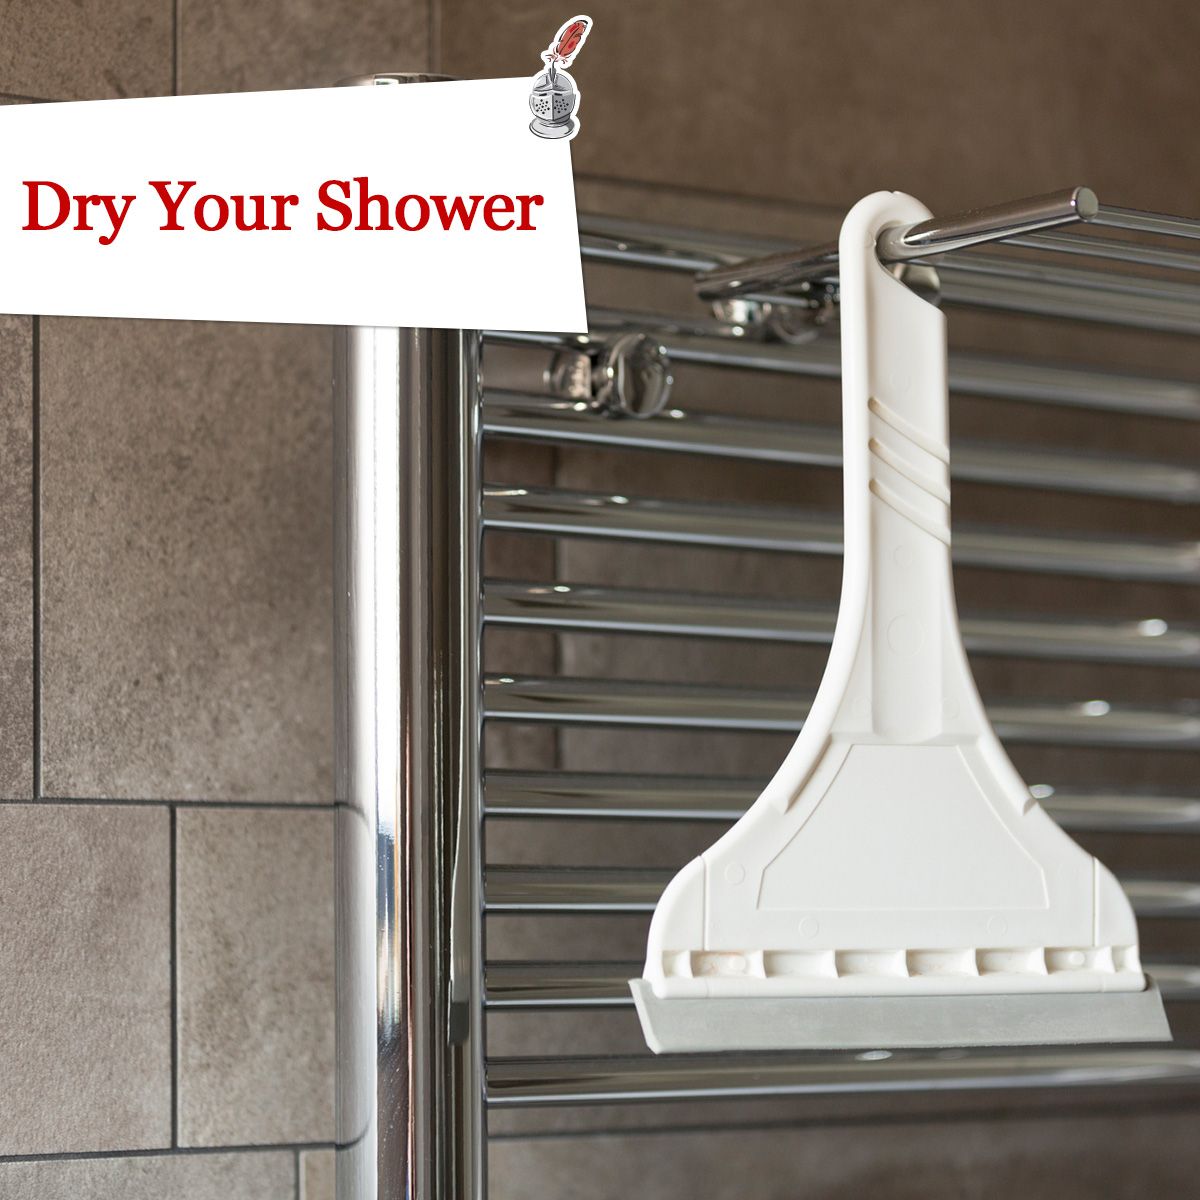 Dry Your Shower